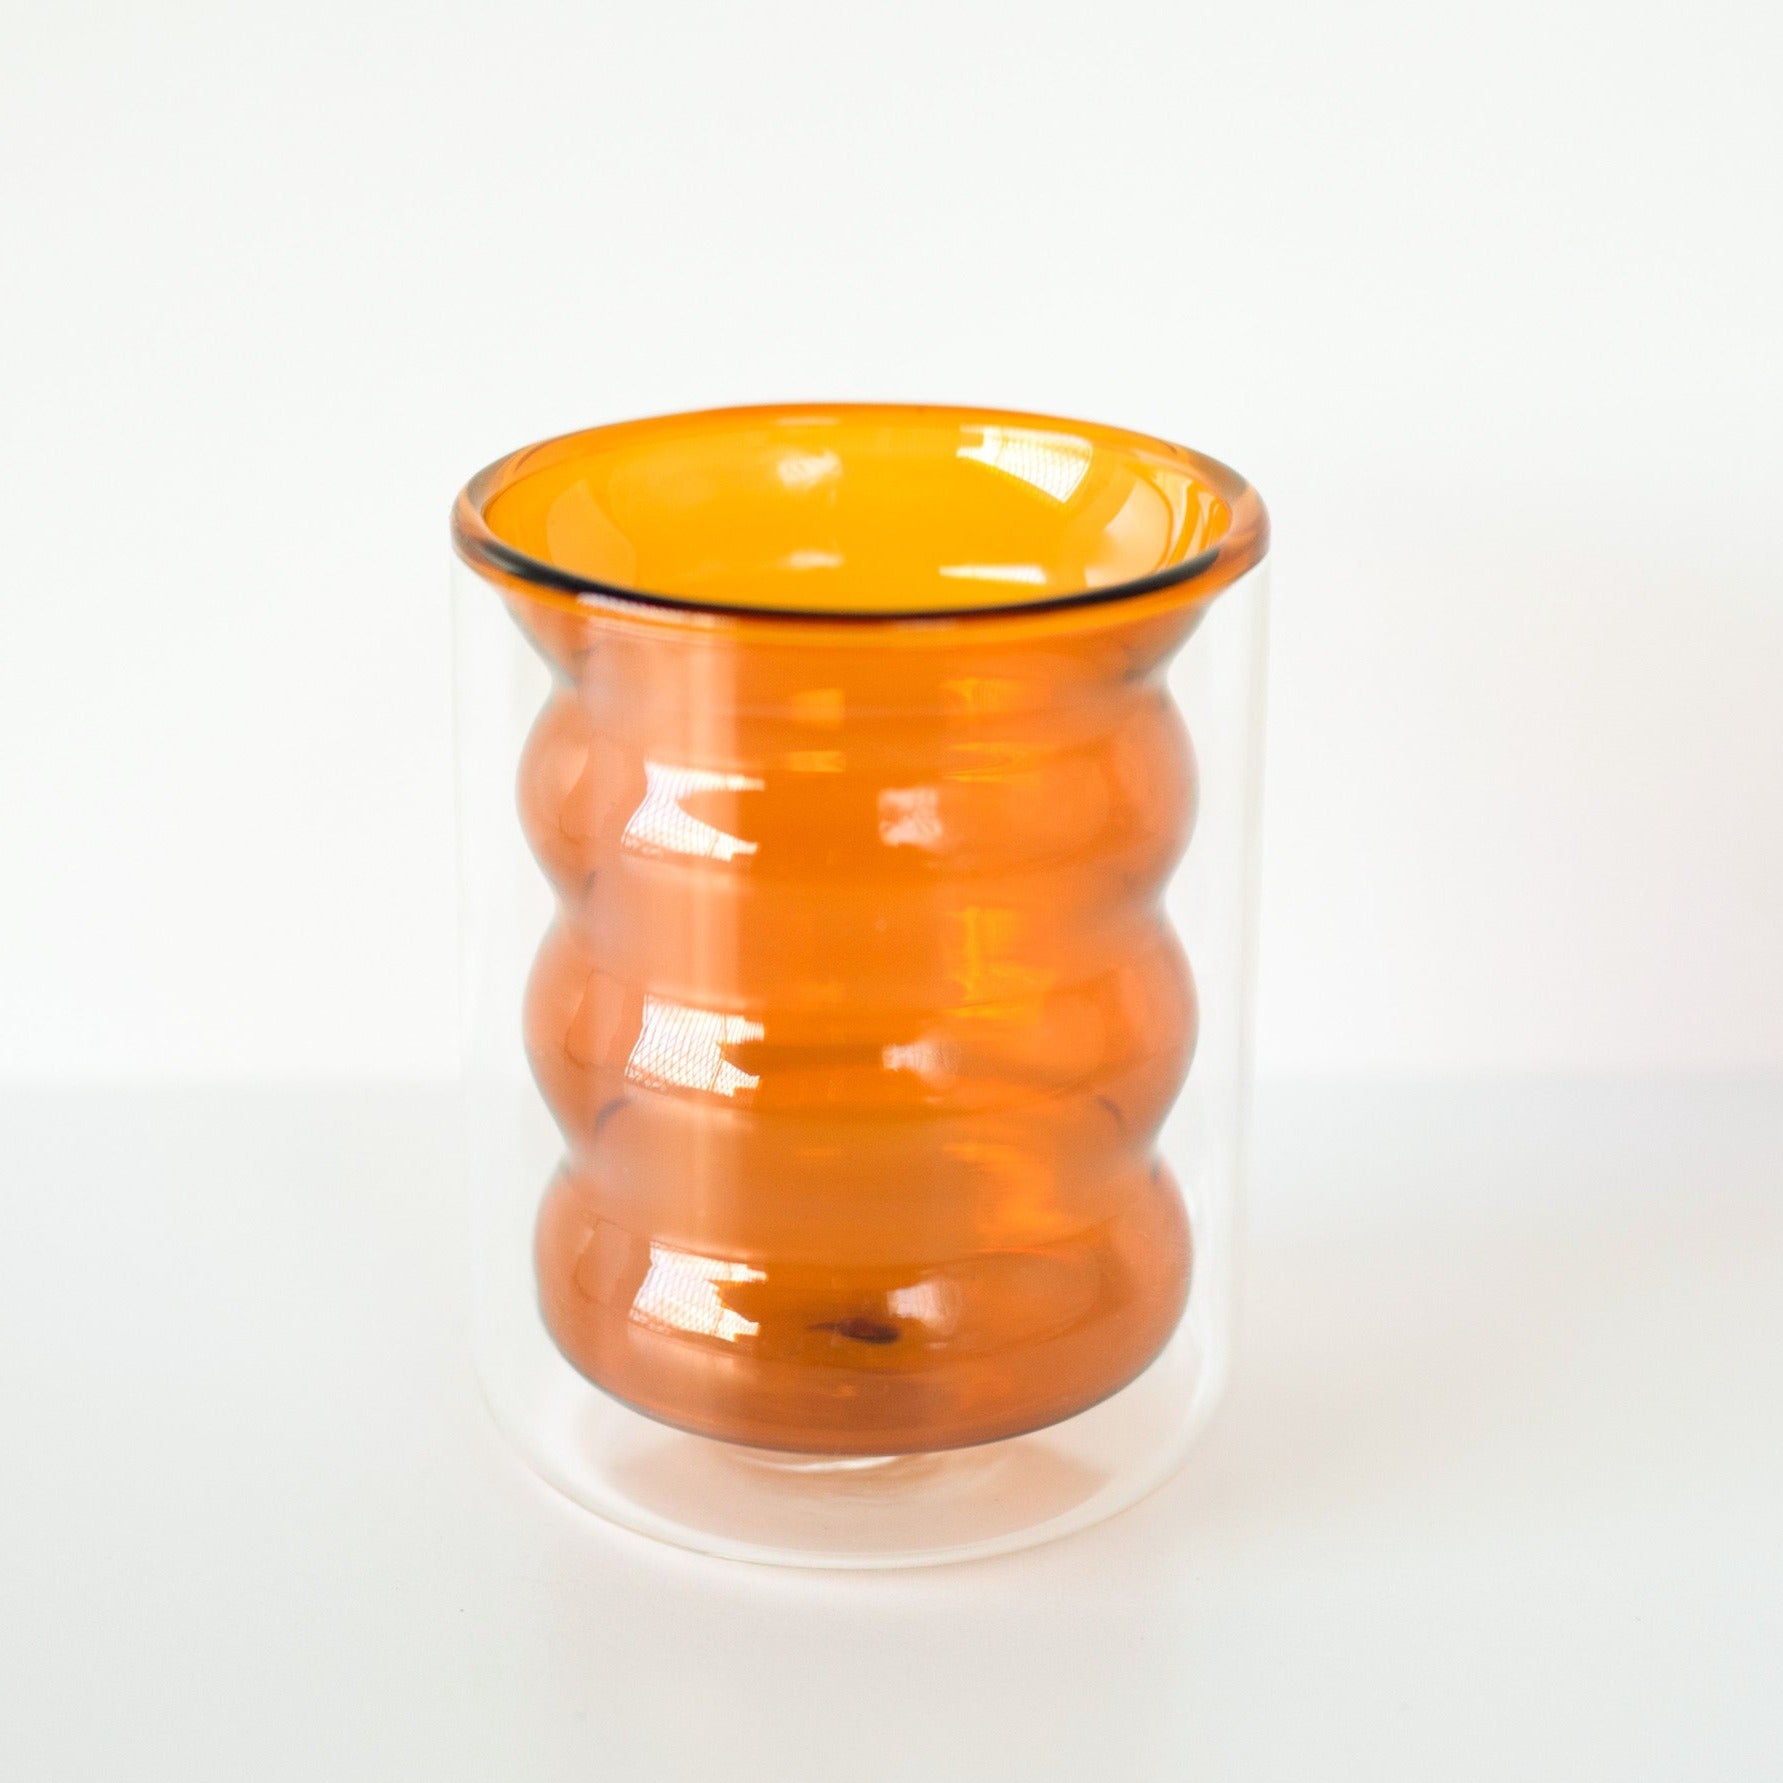 A double-walled amber orange rippled glass standing upright shot against a white background.